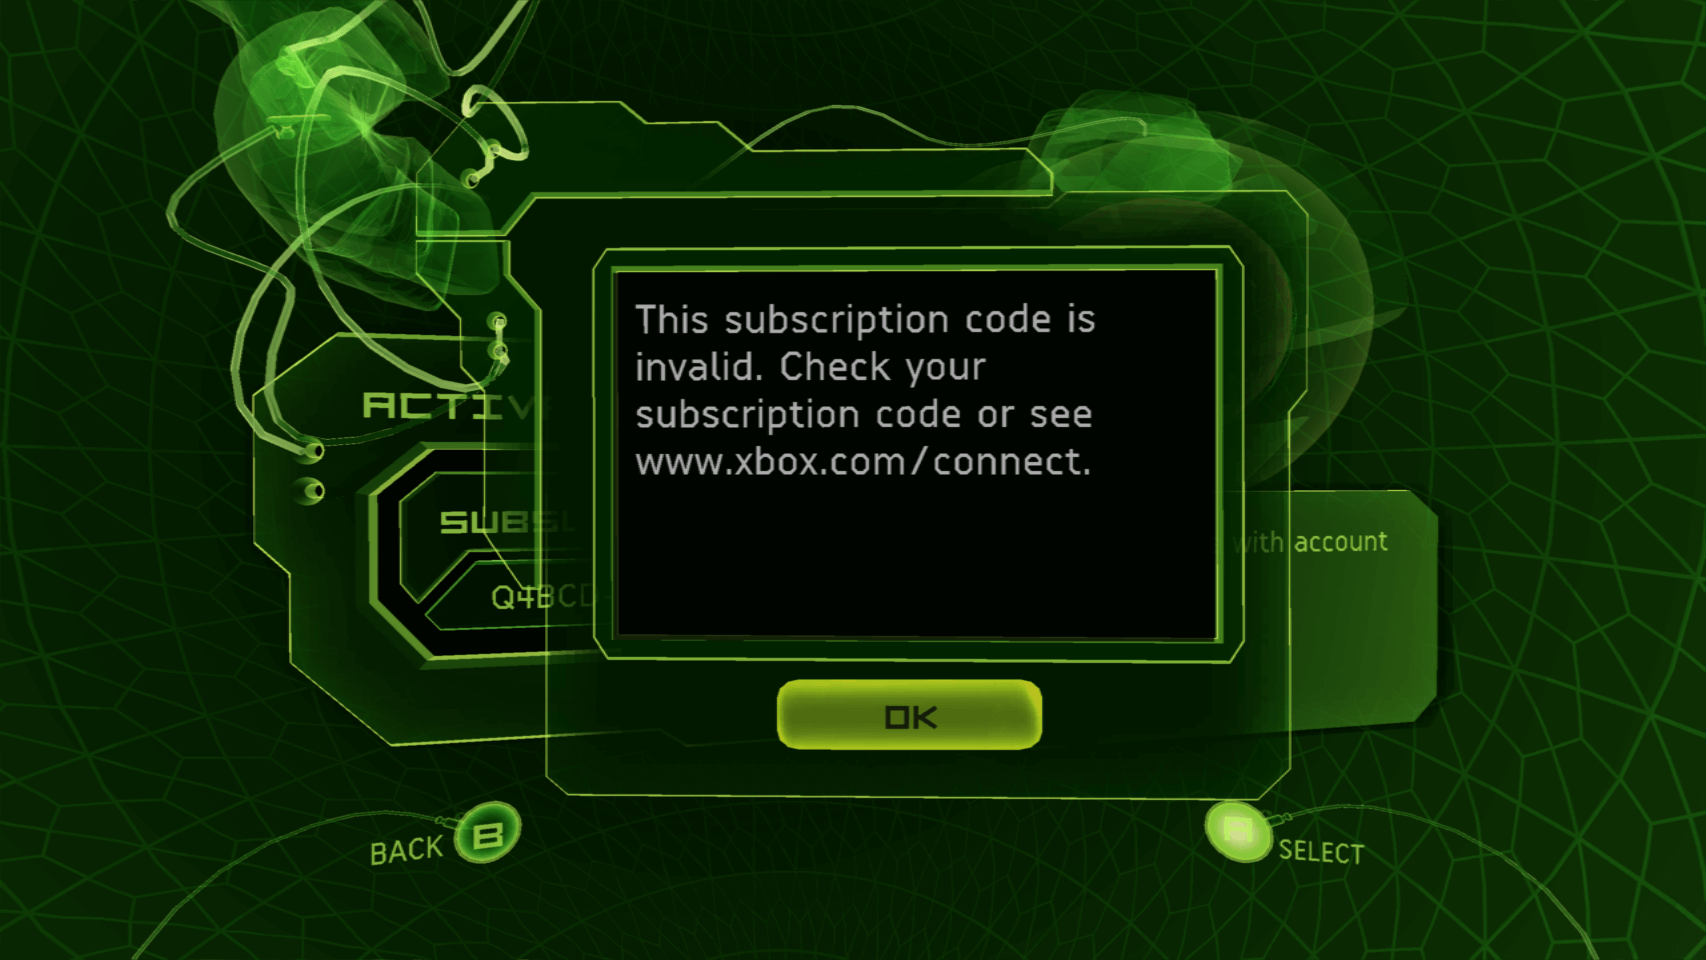 Error box with"The subscription code is invalid. Check your subscription code or see xbox.com/connect" shown.